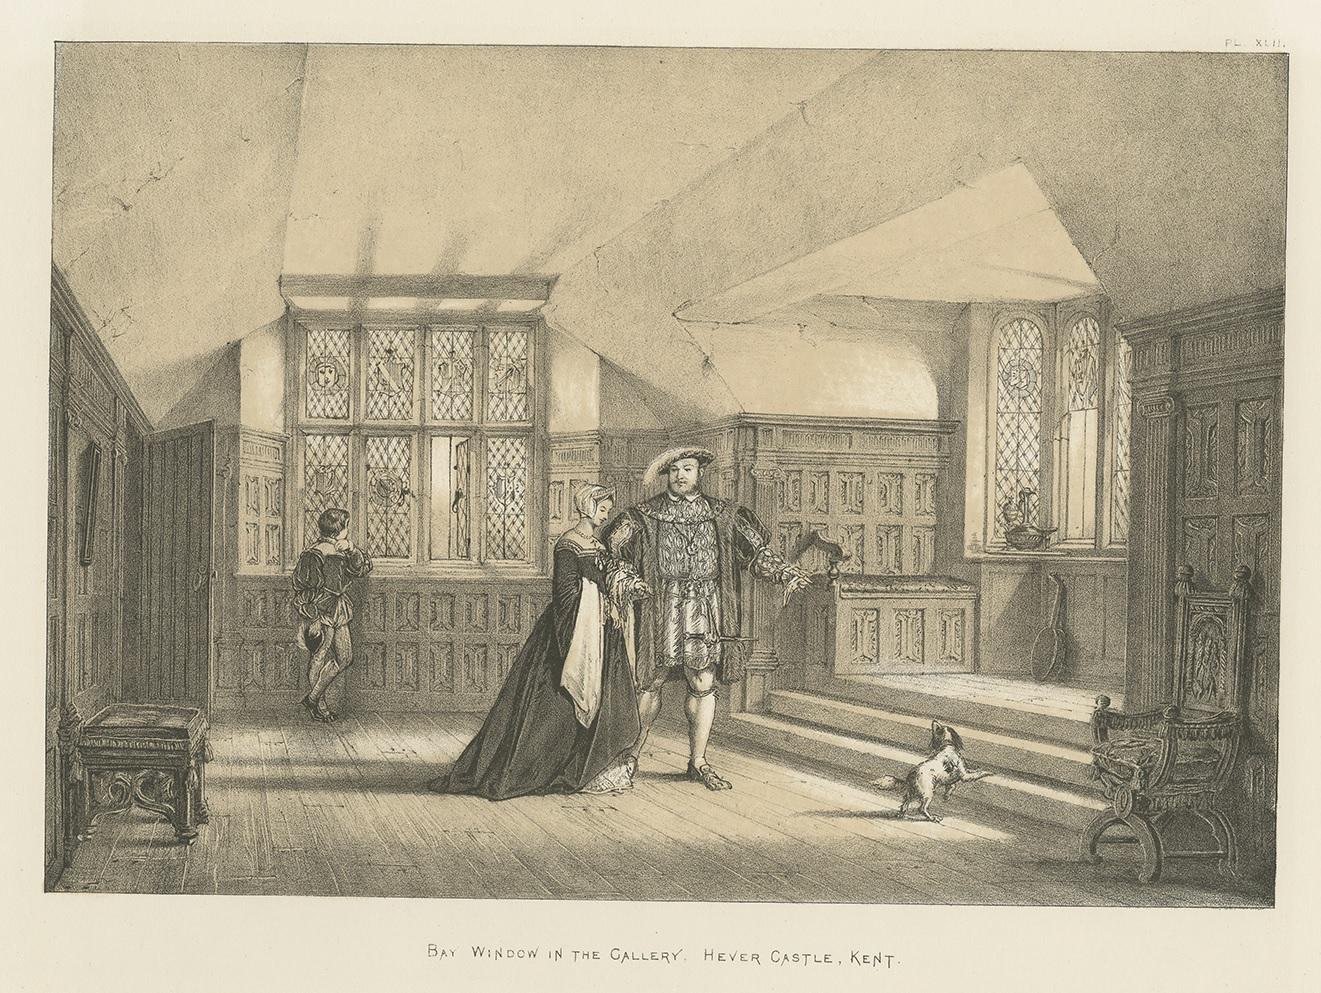 Antique print titled 'Bay Window in the Gallery. Hever Castle. Kent'. Lithograph of the gallery of Hever Castle, Kent, England. This print originates from 'The Mansions of England in the Olden Time' by Joseph Nash.